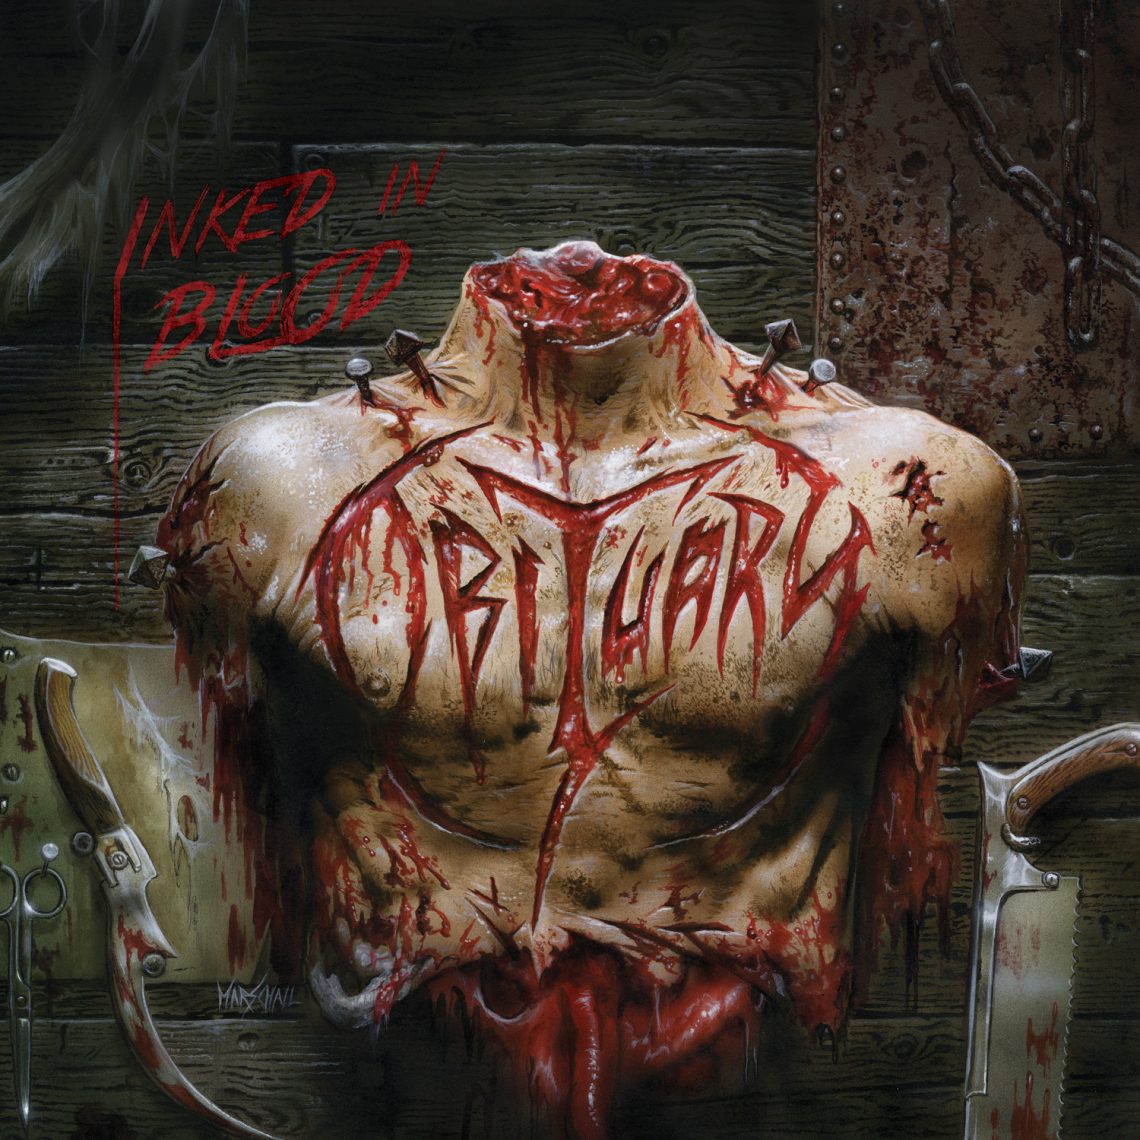 Obituary release album trailer for Inked In Blood